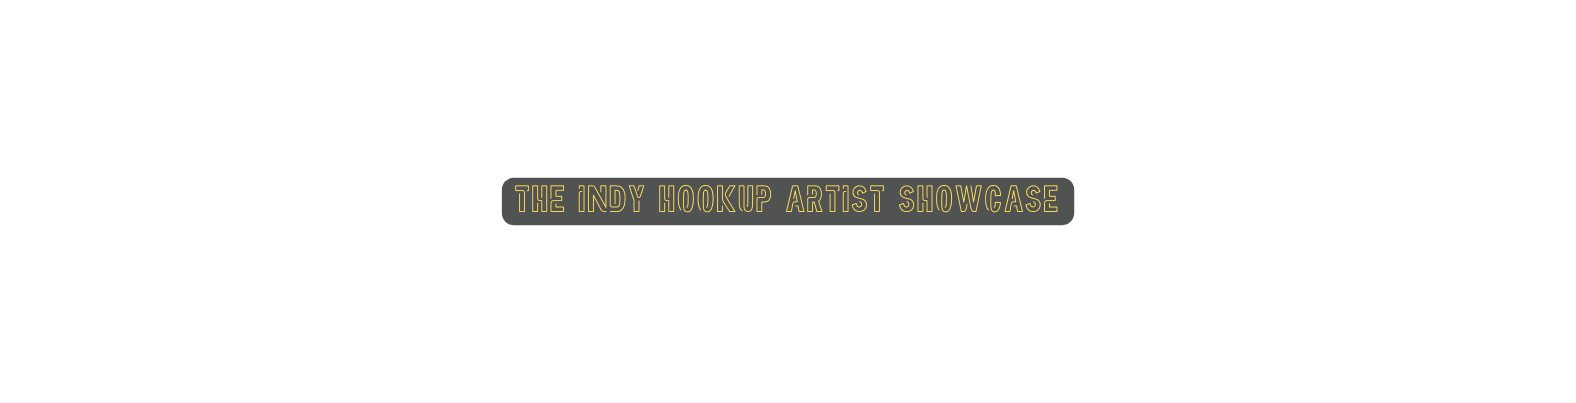 The indy hookup artist showcase